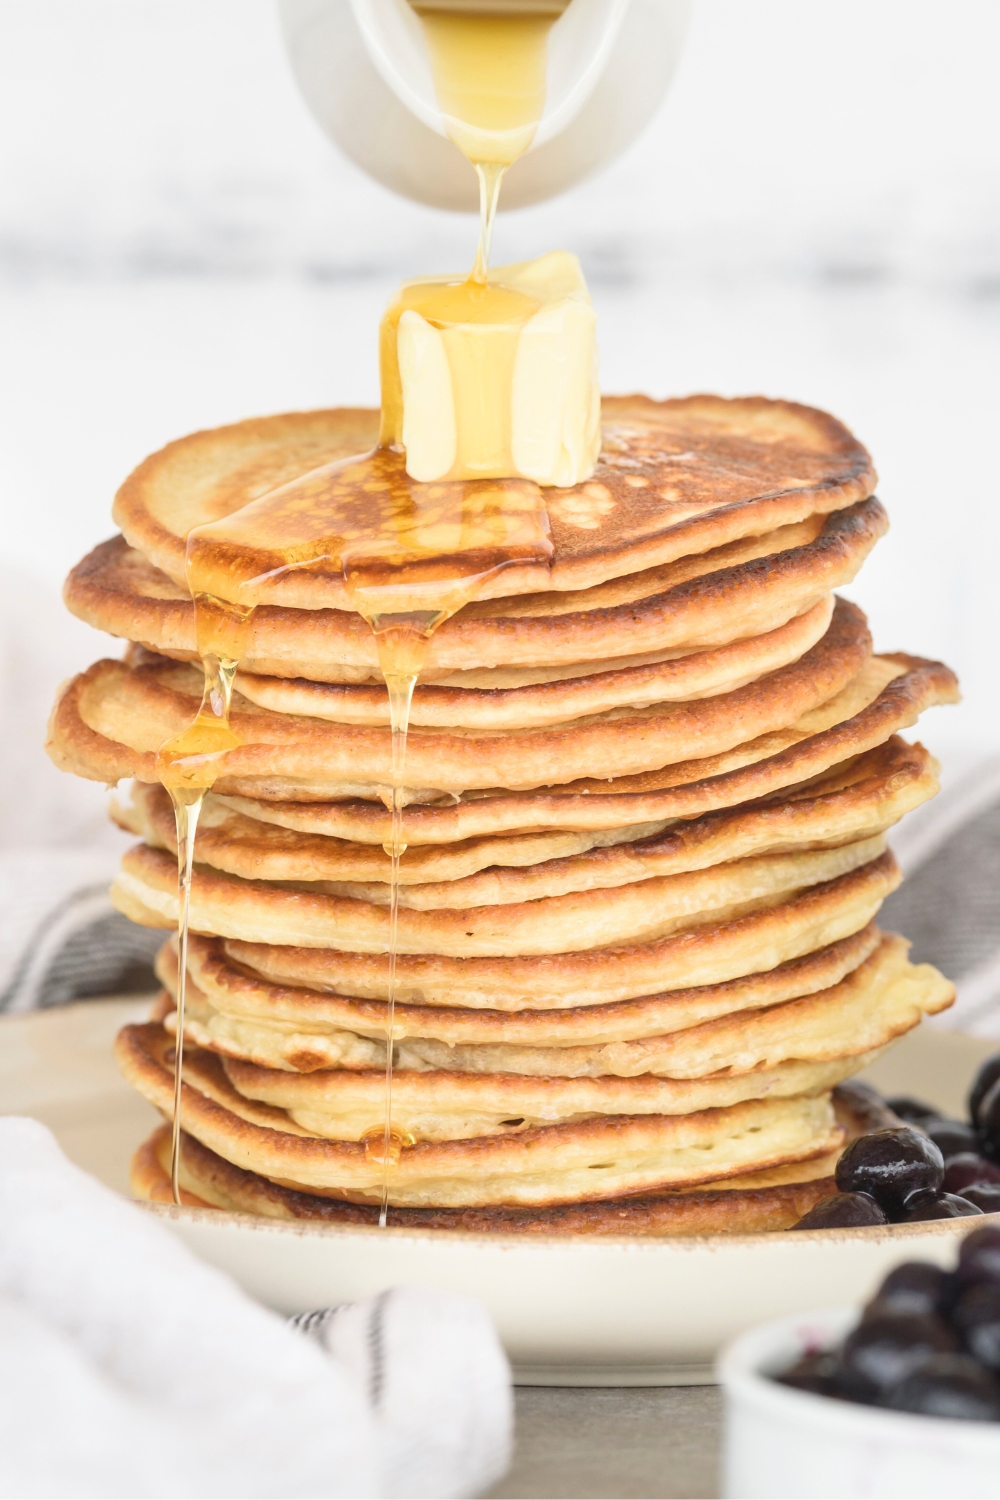 Maple syrup being poured on top of a cube of butter on a stack of ten pancakes on a white plate.